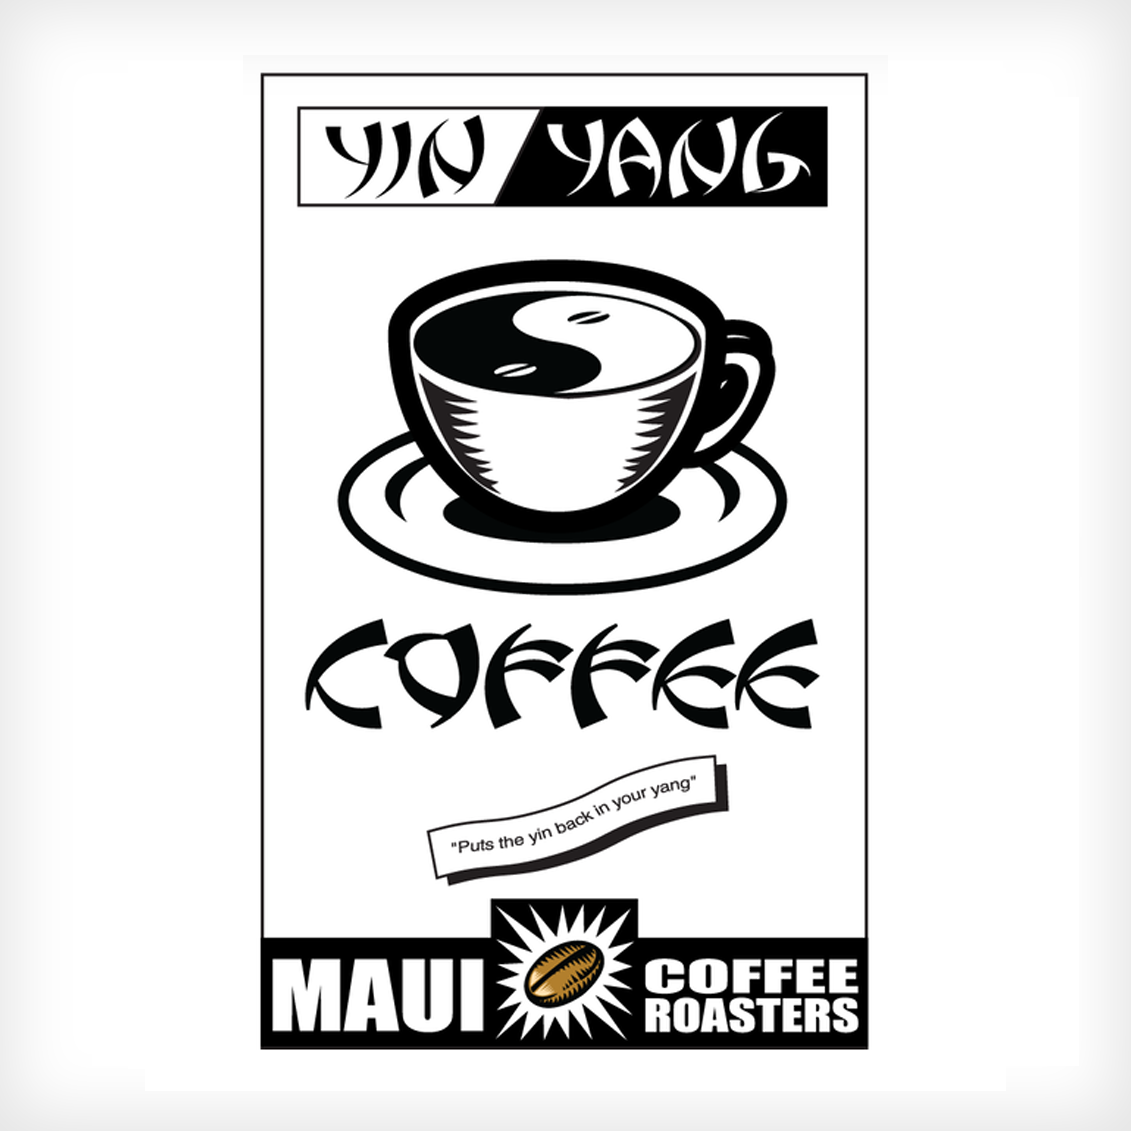 Maui Coffee Roasters Promotional Poster